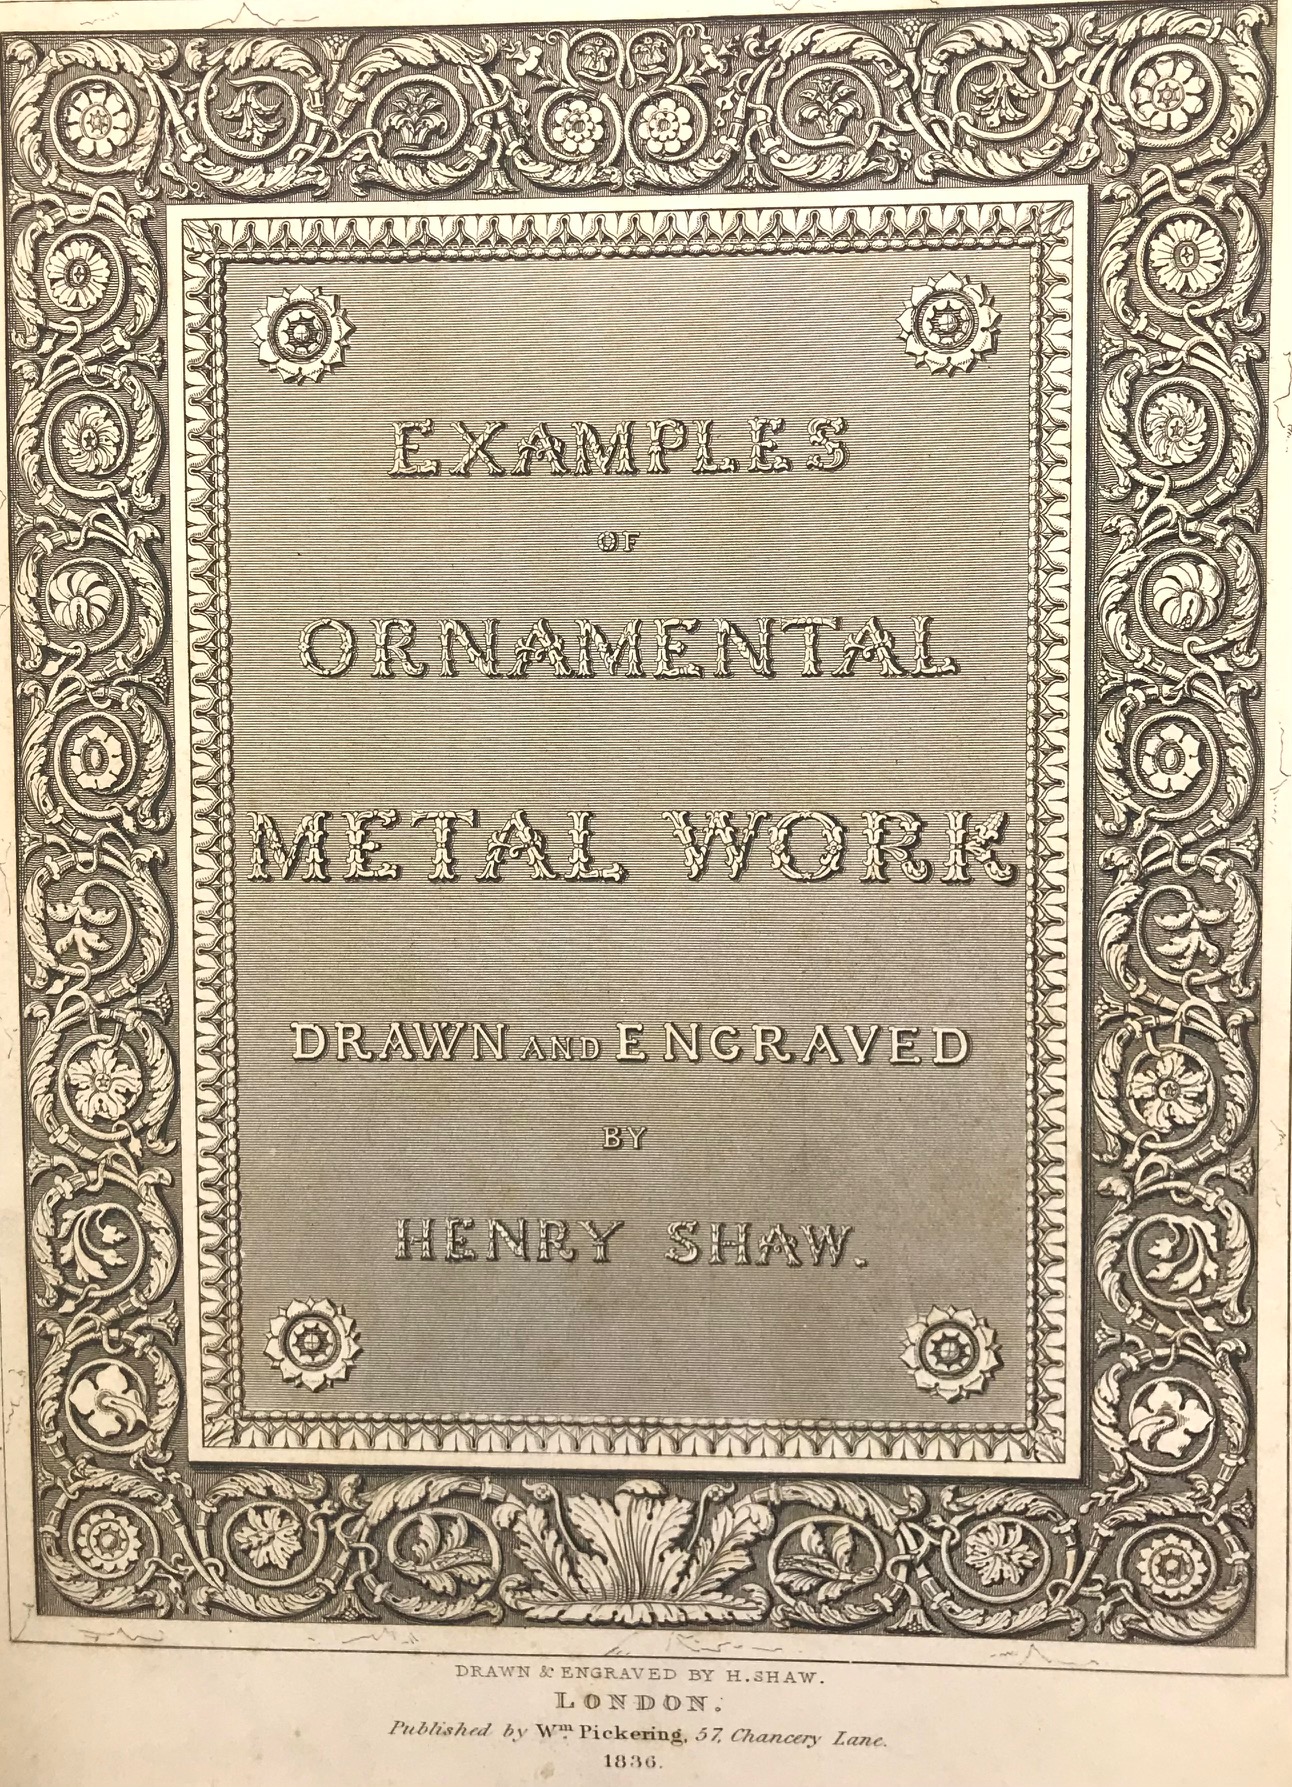 EXAMPLES OF ORNAMENTAL METAL WORK, by Henry Shaw - 1836 [Plates]